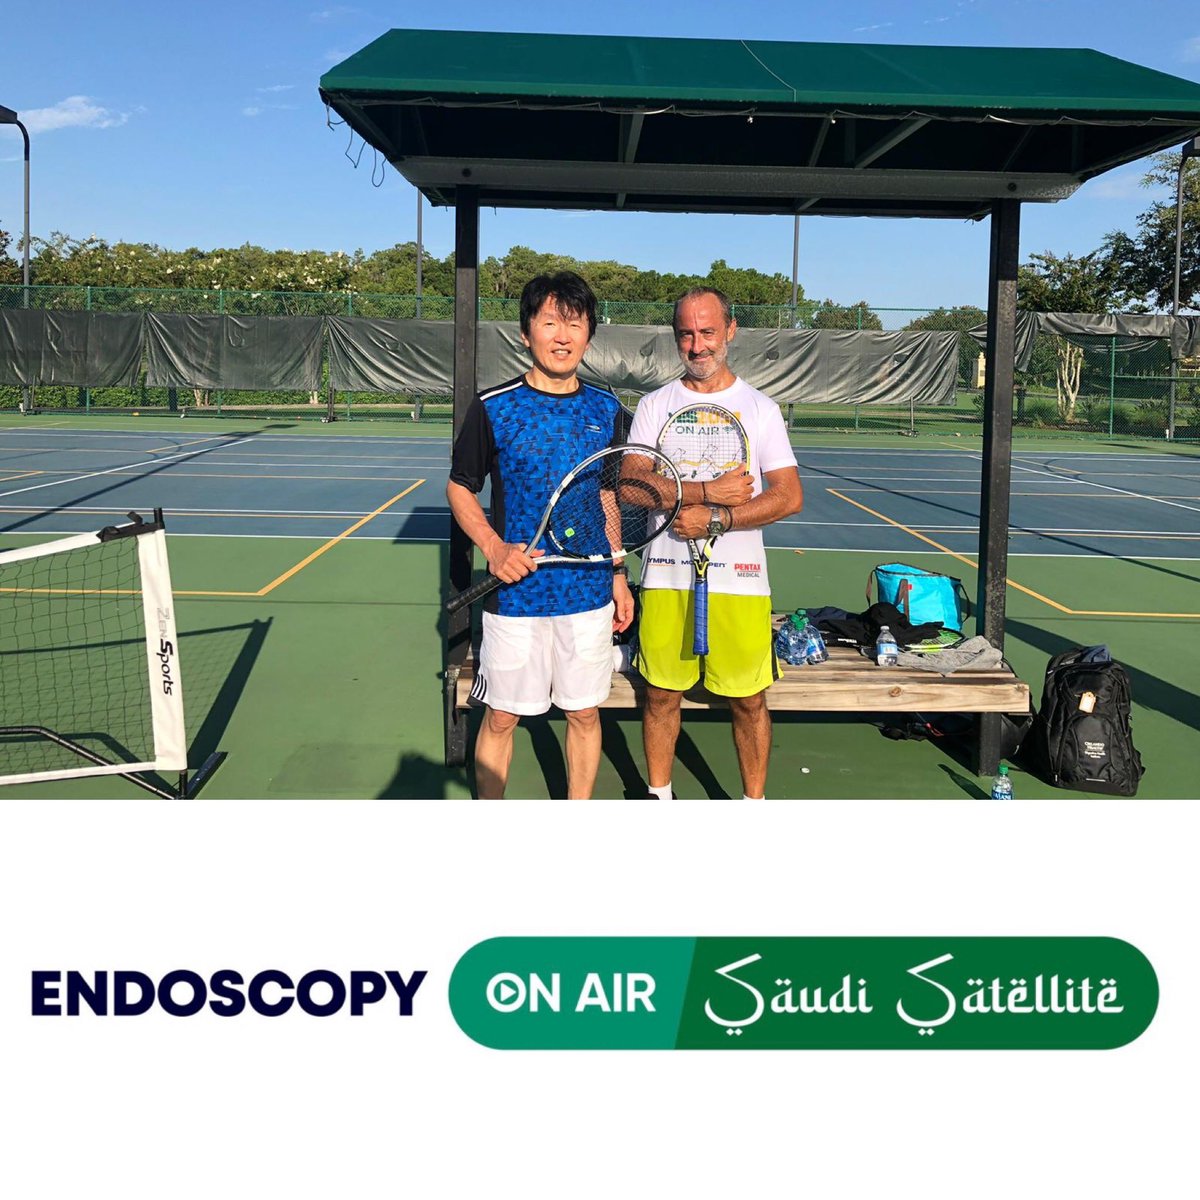 After intense tennis match, tomorrow both of us will be busy with complex ESD cases on Saudi on air. Join us on endoscopyonair.com to watch western vs japanese style for colorectal ESD @EndoscopyOA